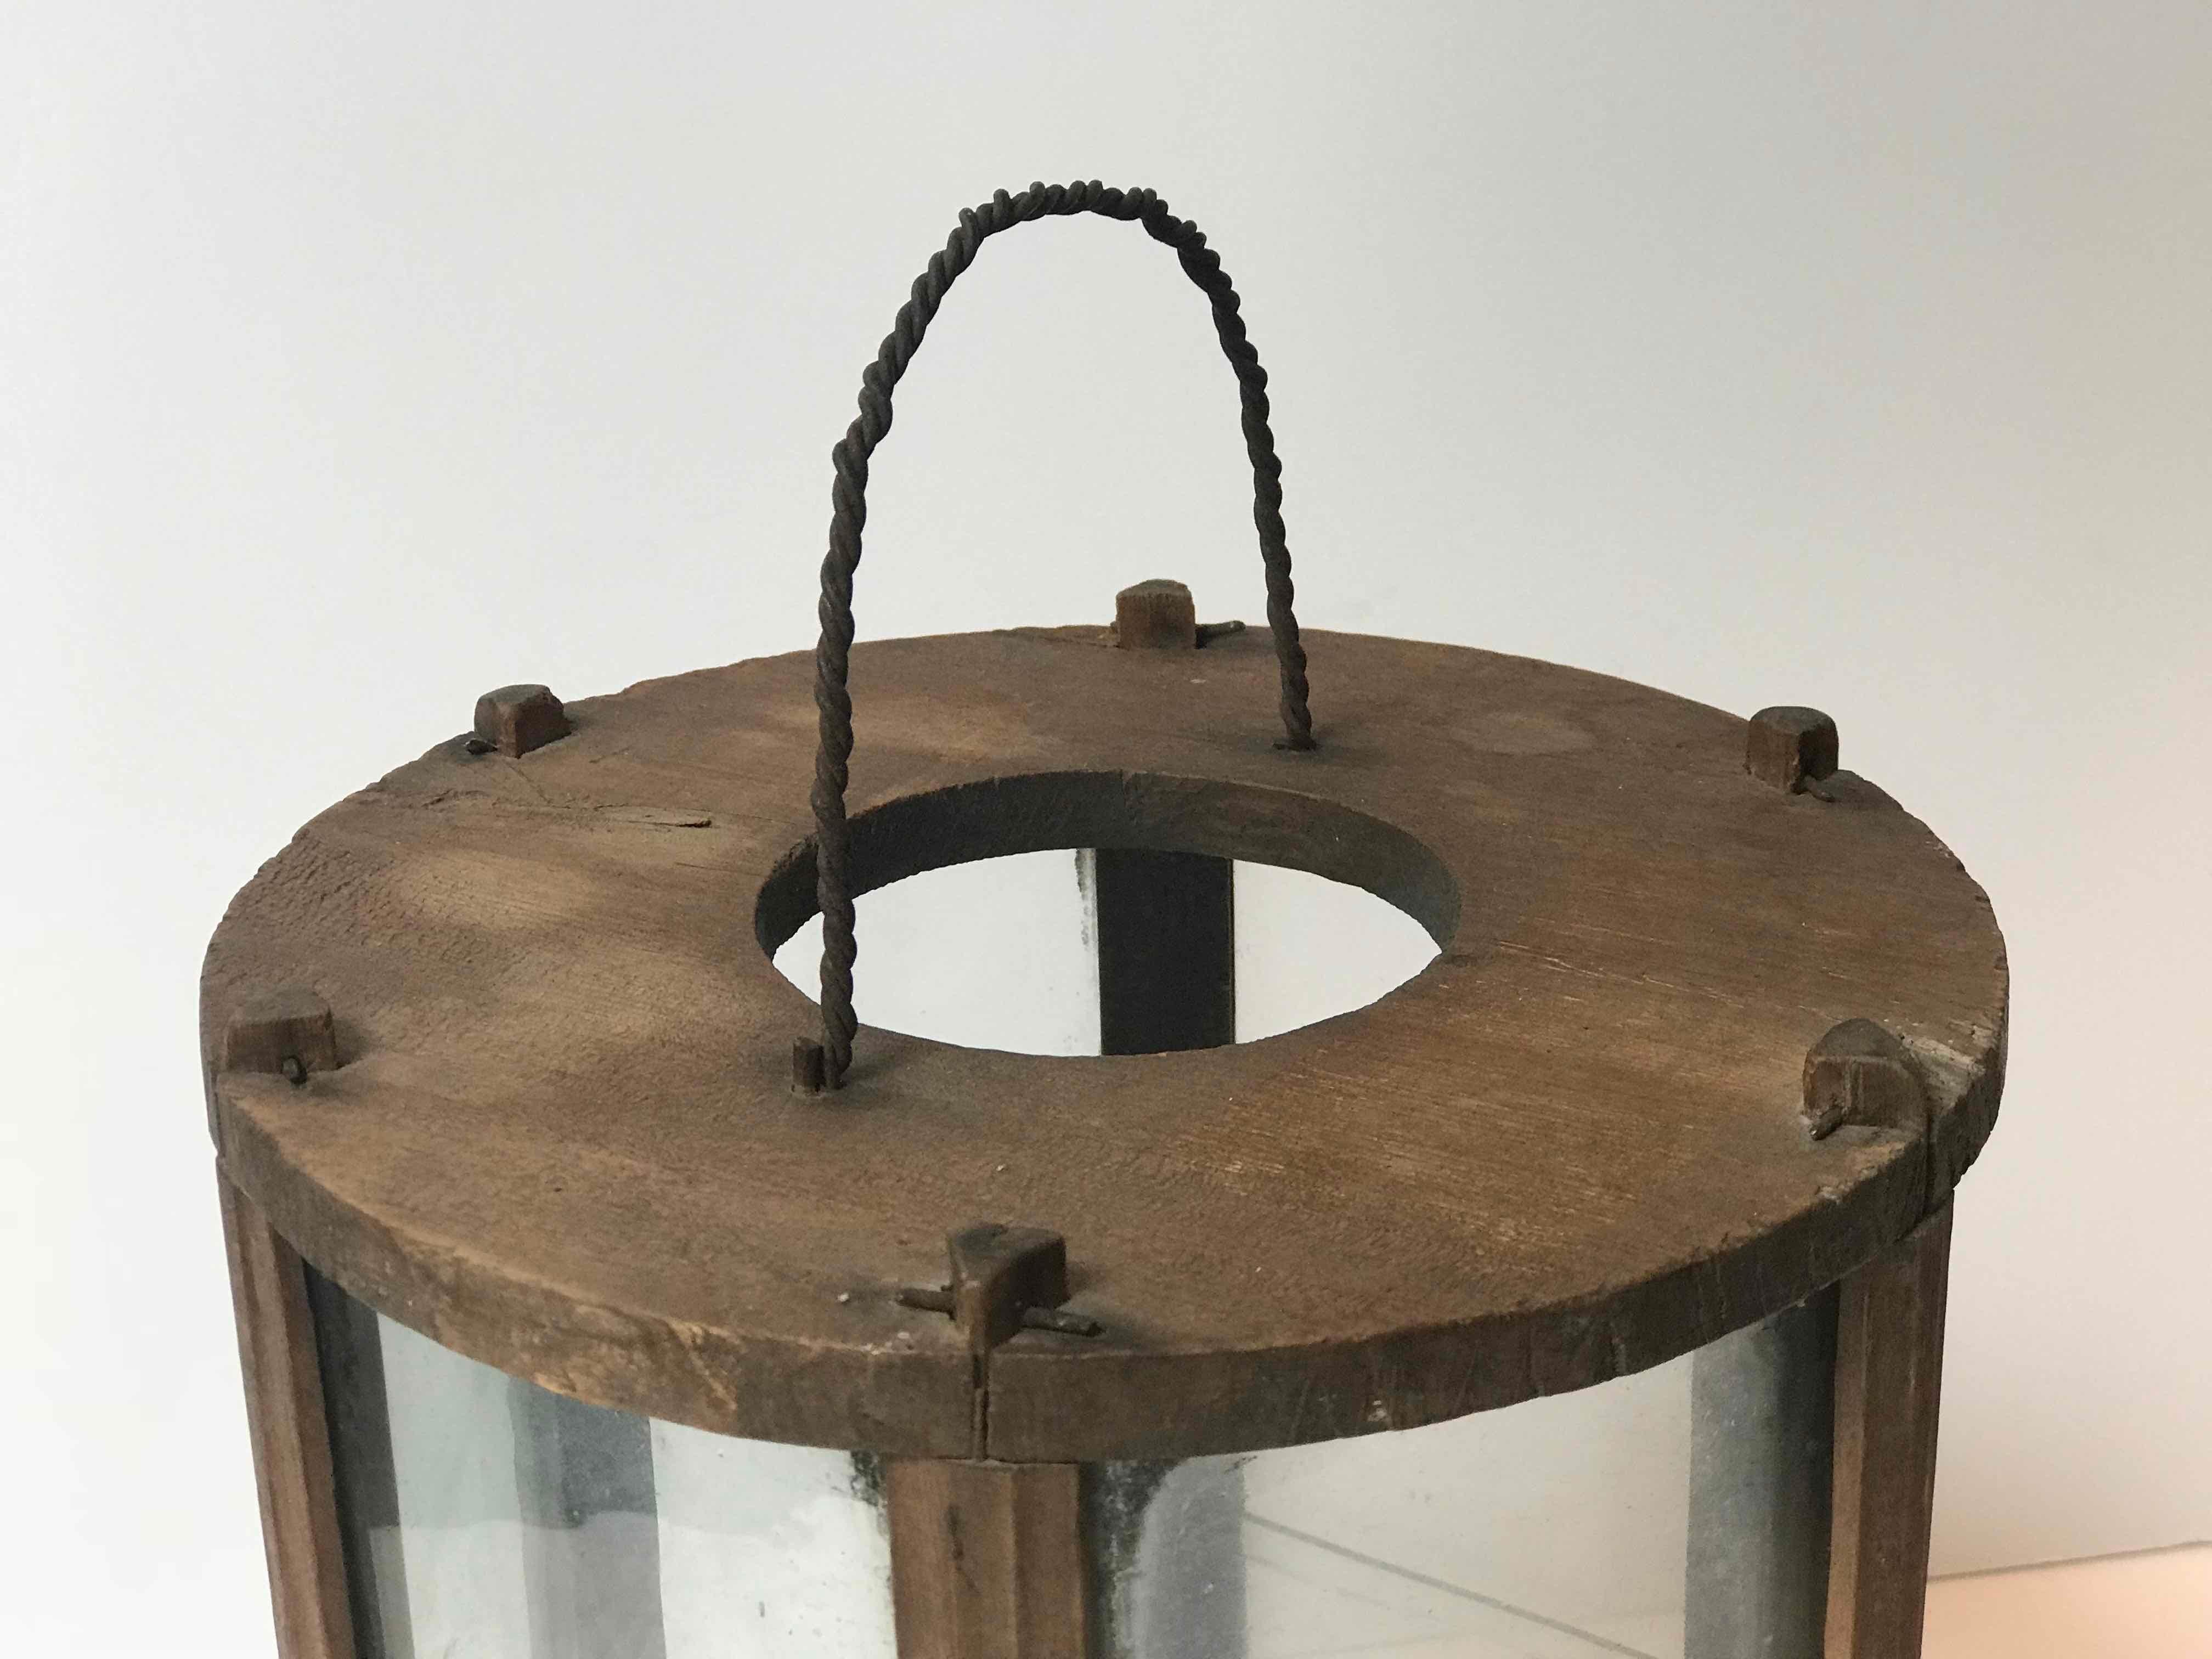 Swedish 19th-century six-sided wooden hurricane lantern or lamp with original glass and metal carrying handle. Rustic and understated, the lamp is mounted on a circular base that supports one standard-sized taper. The patina here is exquisite—the